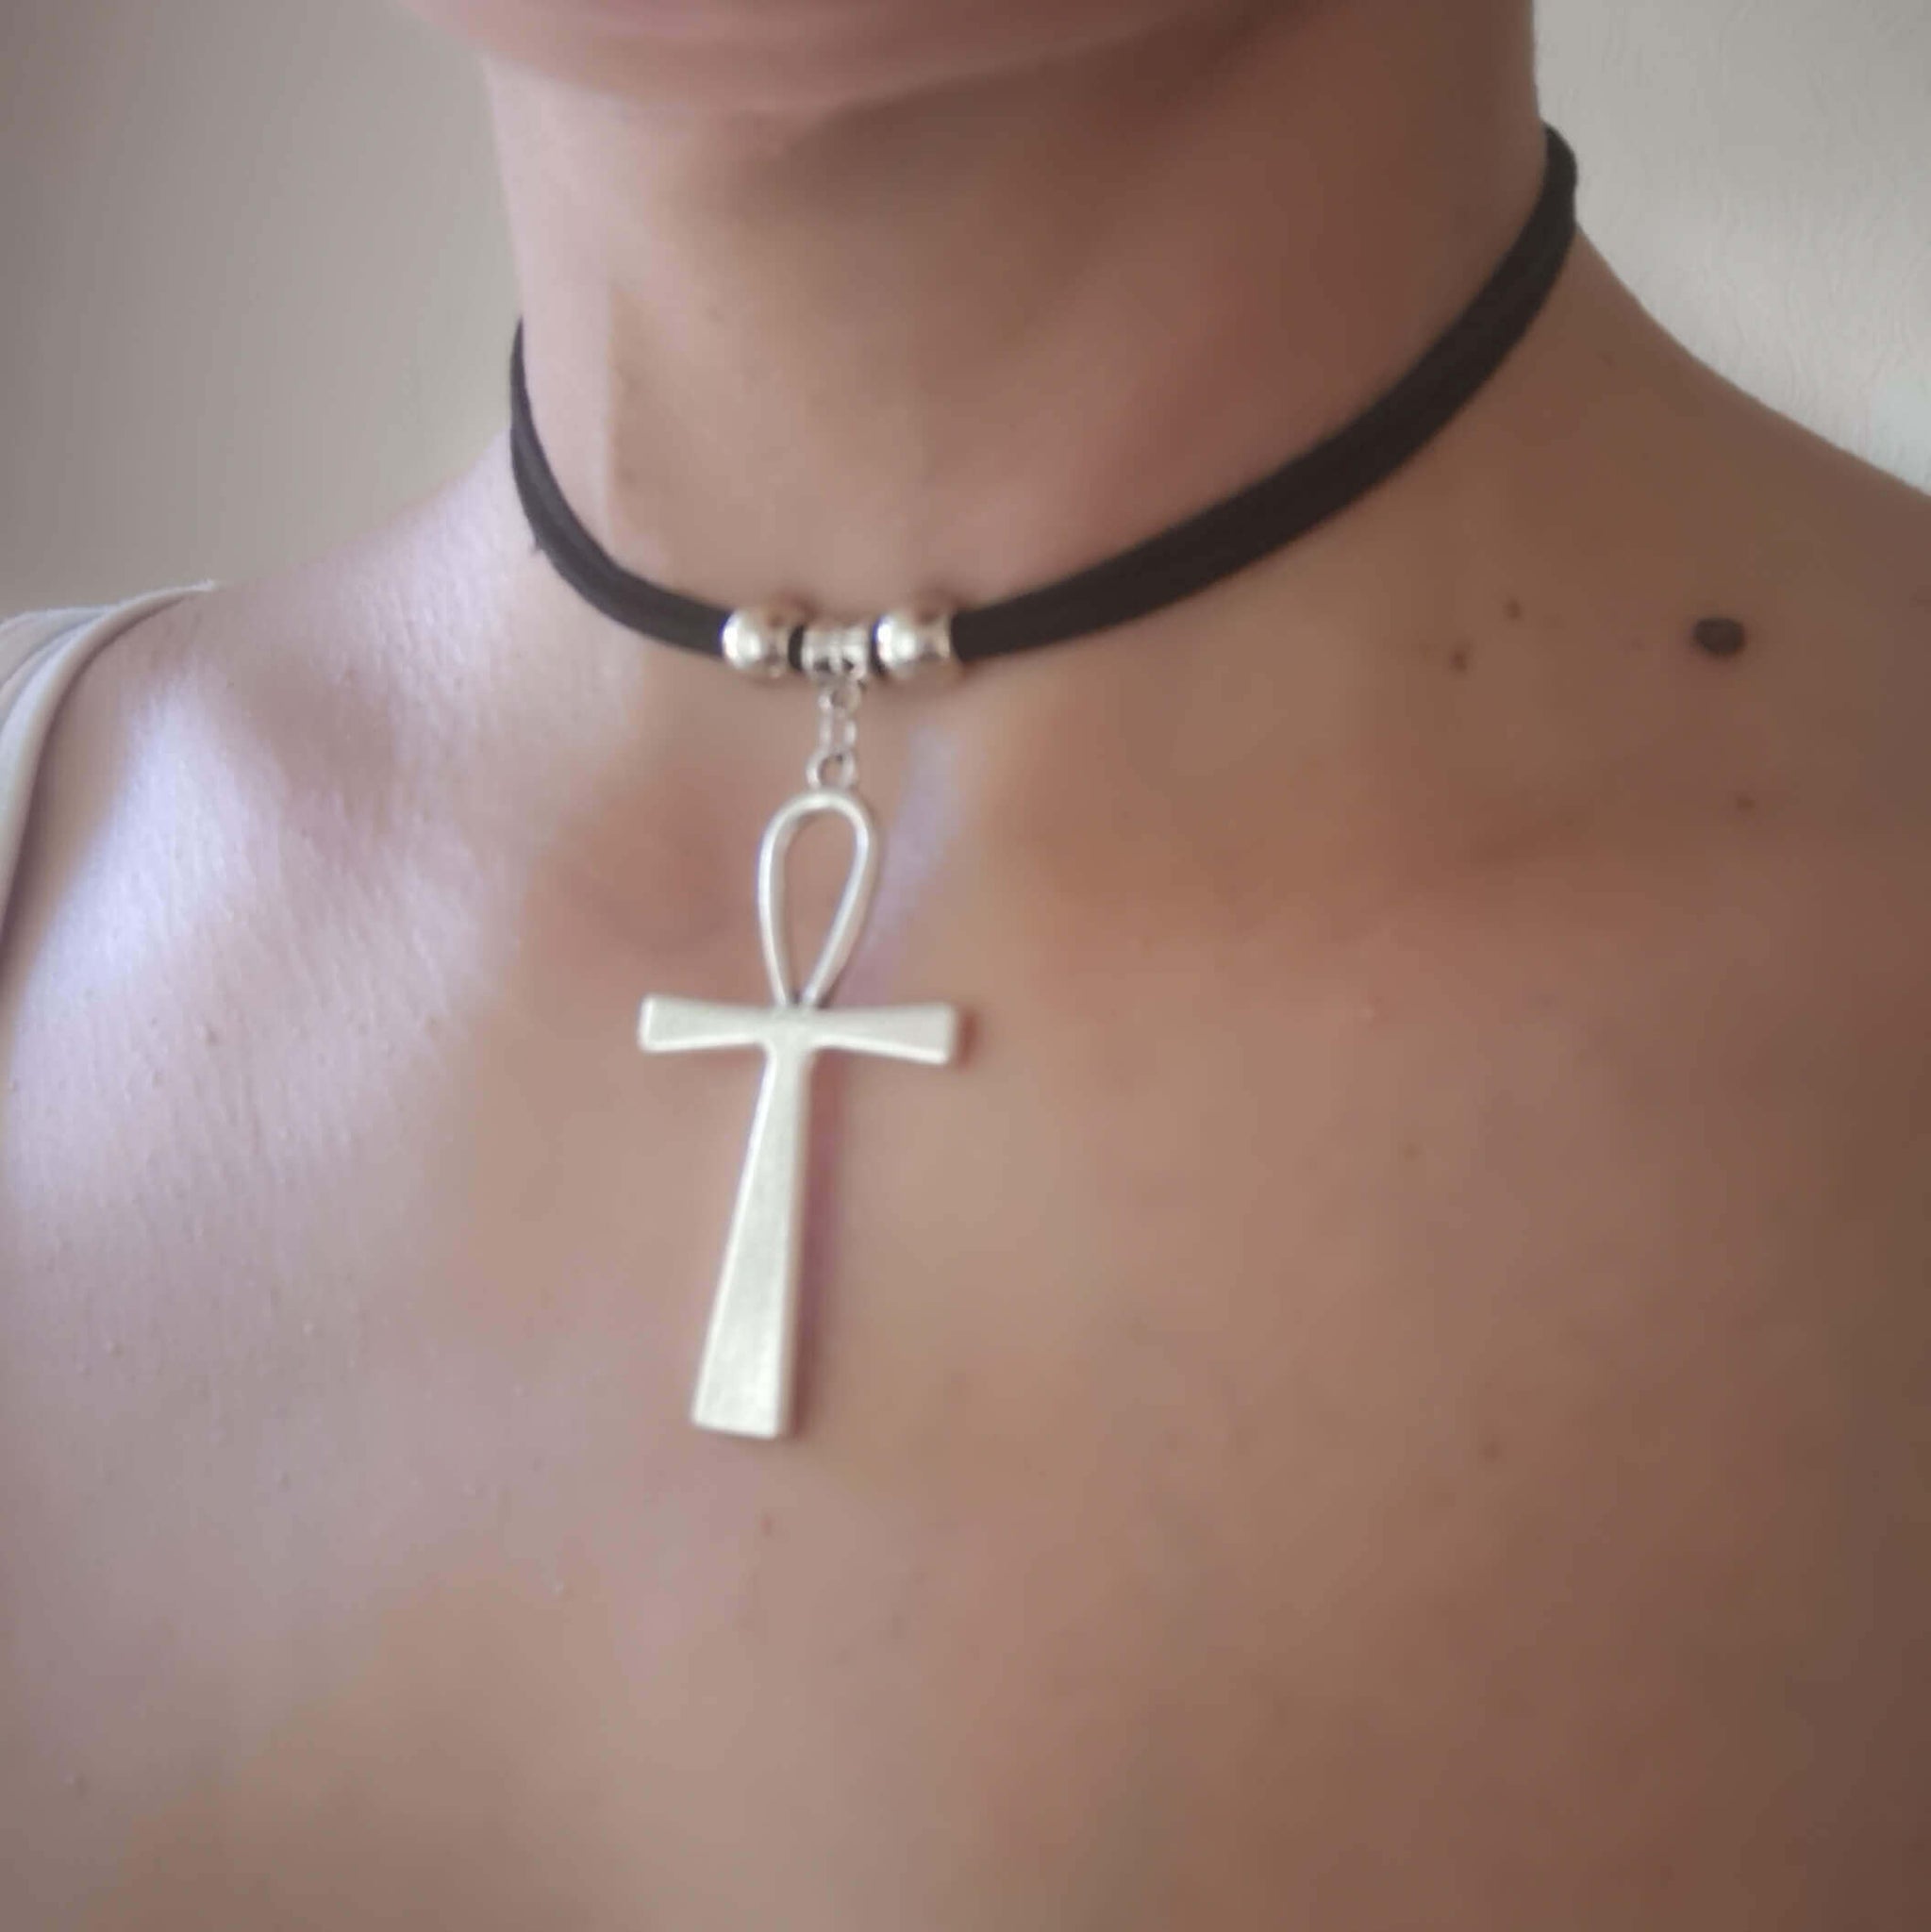 Ankh pendant choker in suede cord